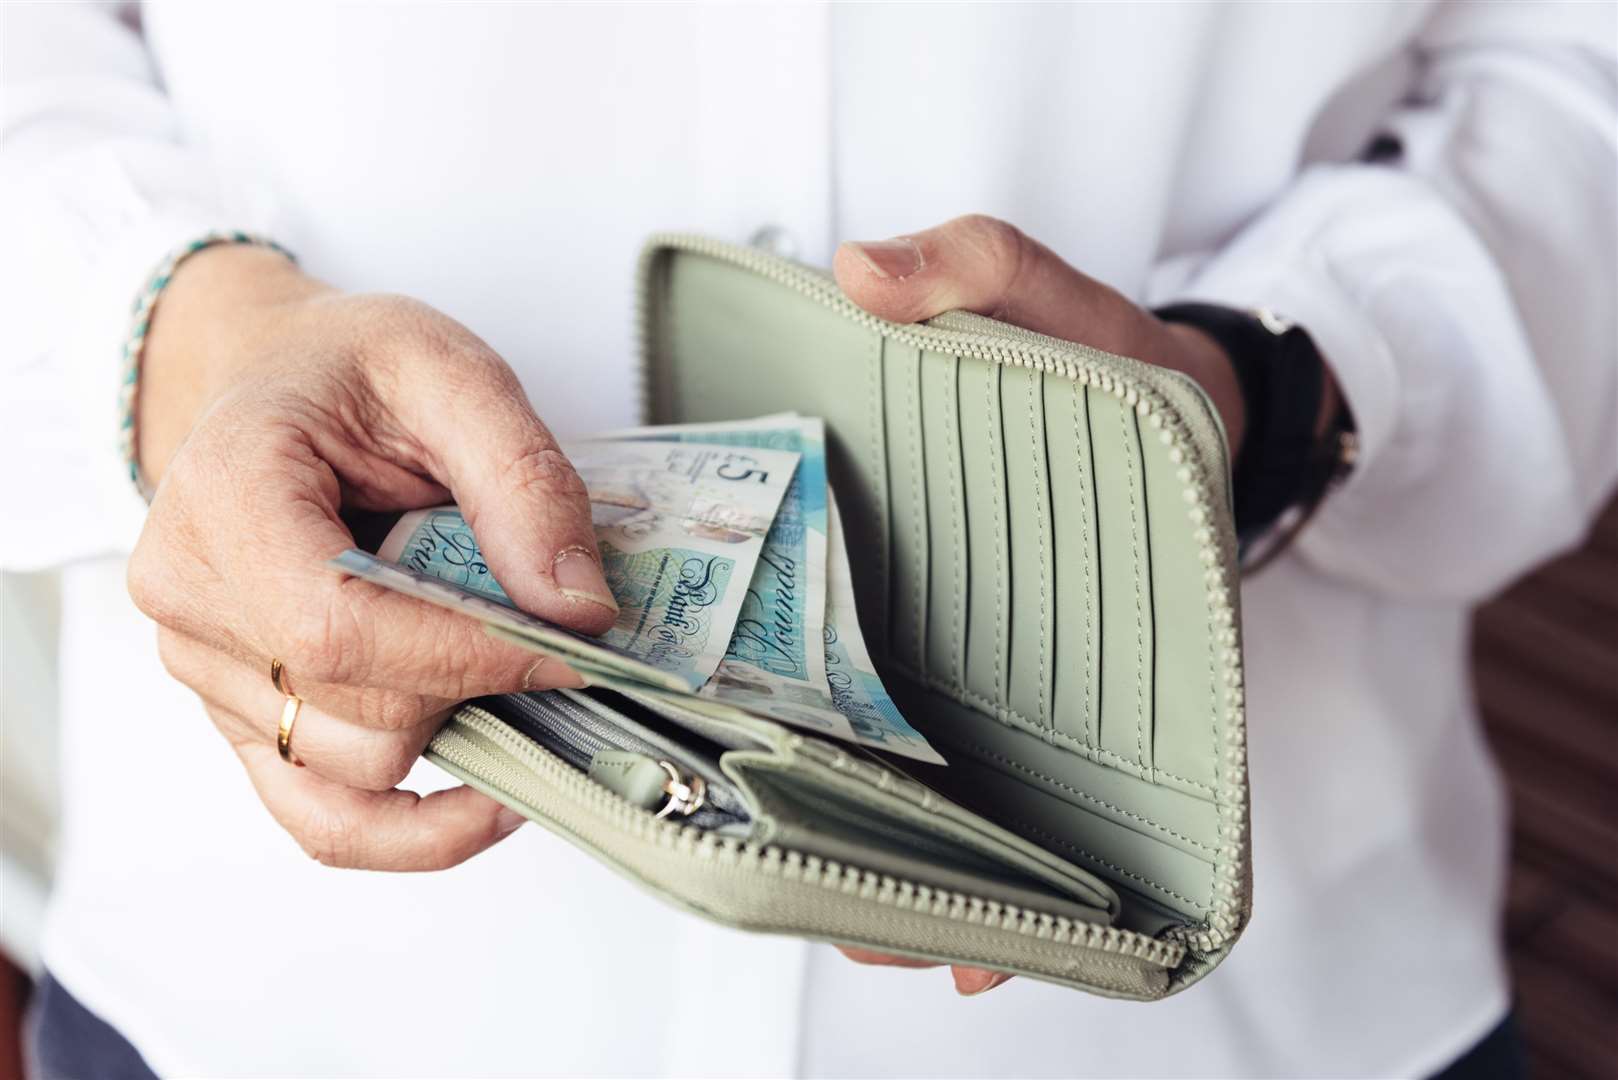 A PPI policy can help someone struggling to repay a loan or credit card debt. Image: iStock.